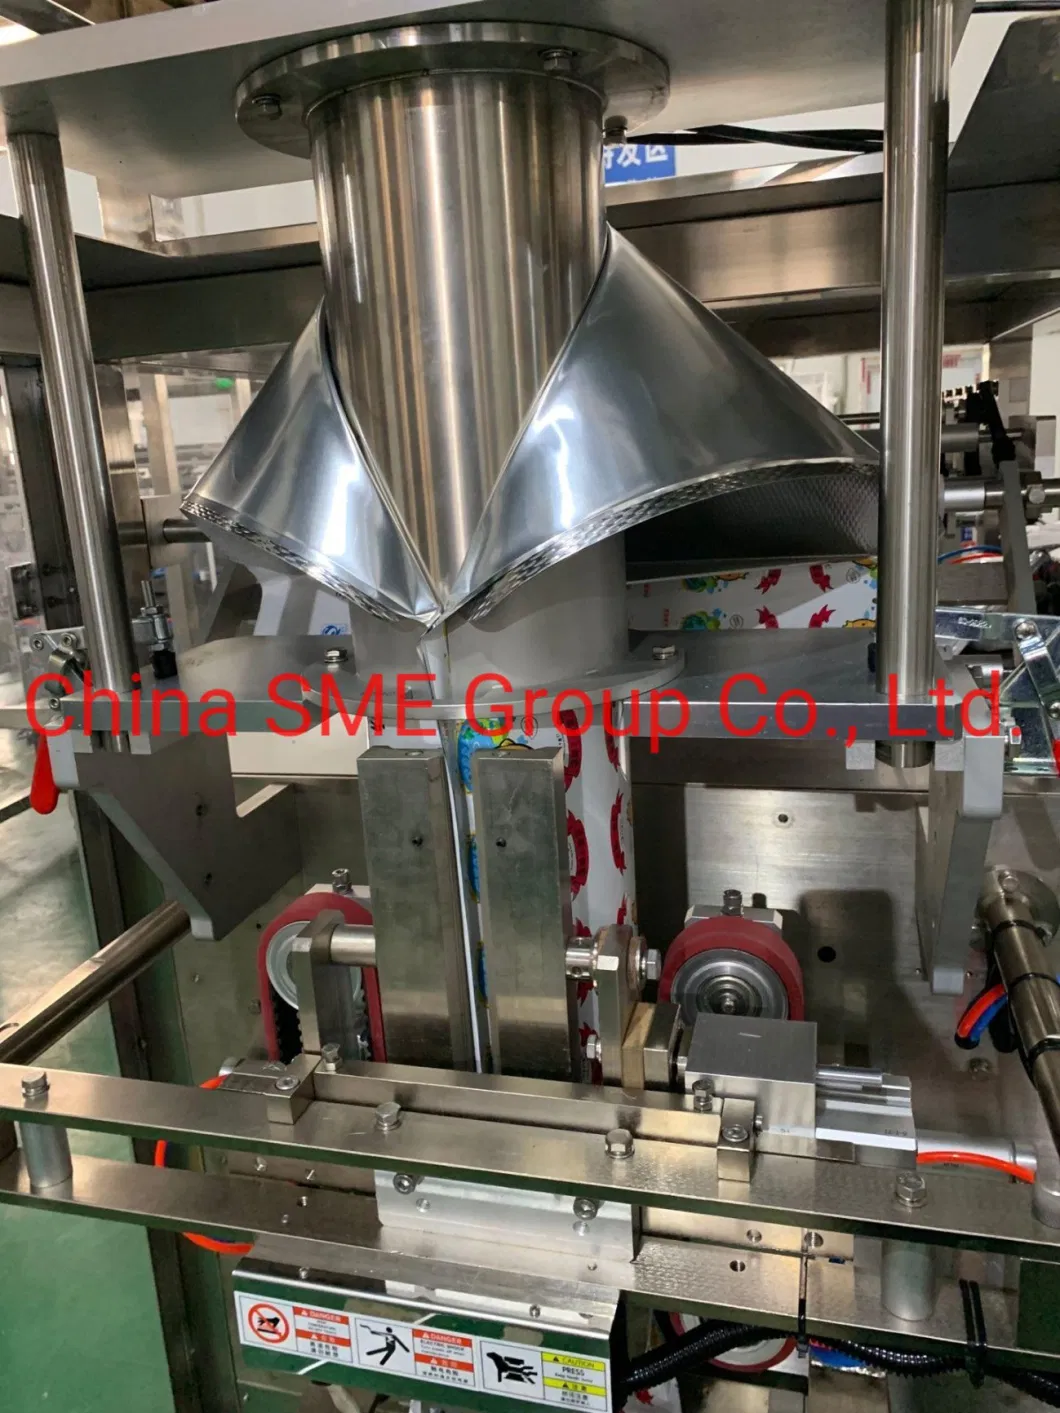 Rotary Vacuum Snacks Food Packaging Machine with Multihead Weighed for Weighing Packing Snacks Food